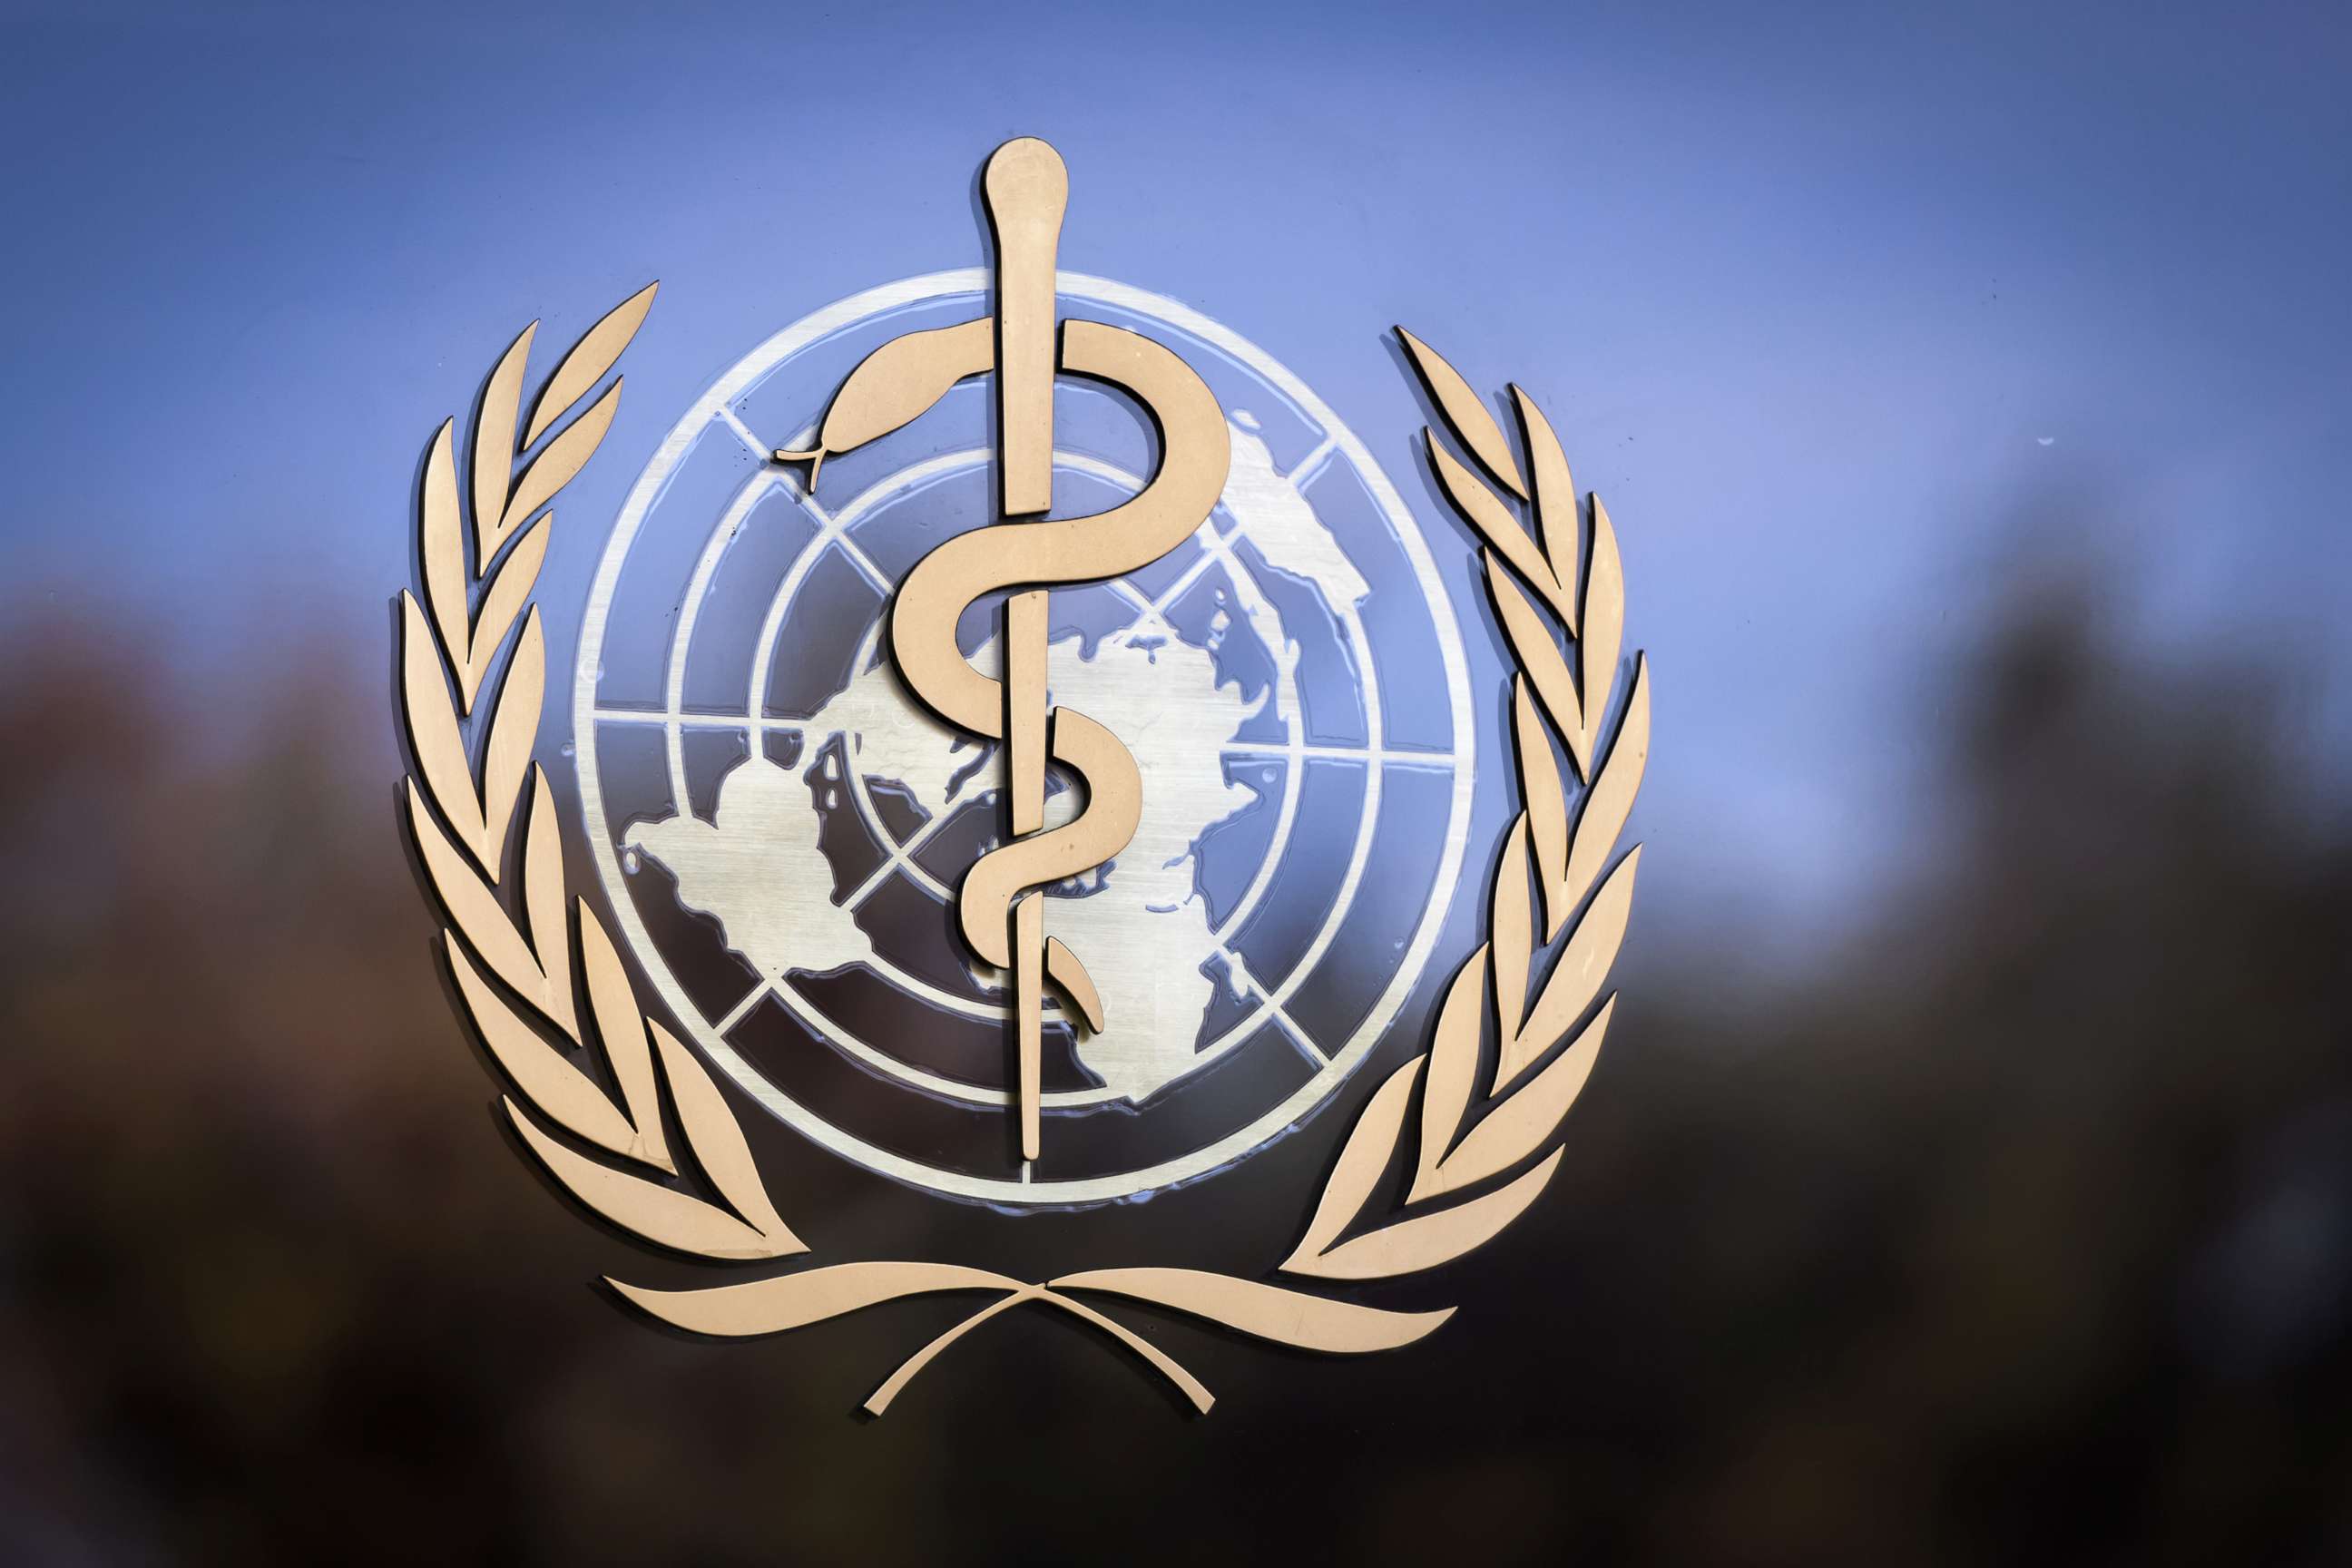 PHOTO: The logo of the World Health Organization (WHO) is pictured on the facade of the WHO headquarters.